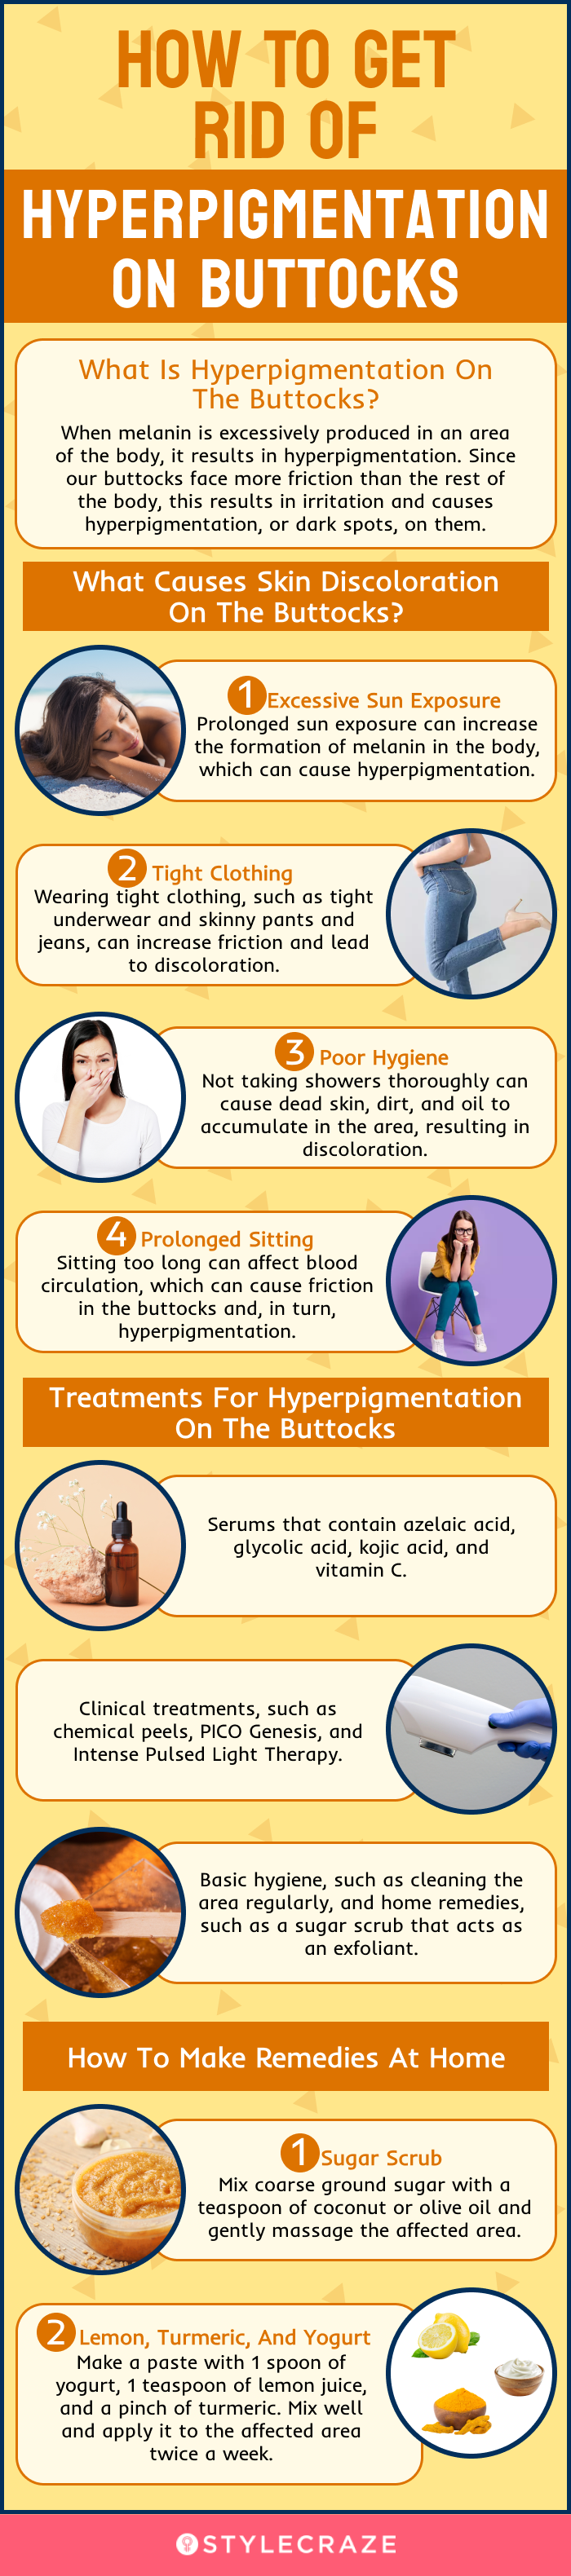 how to get rid of hyperpigmentation on buttocks (infographic)